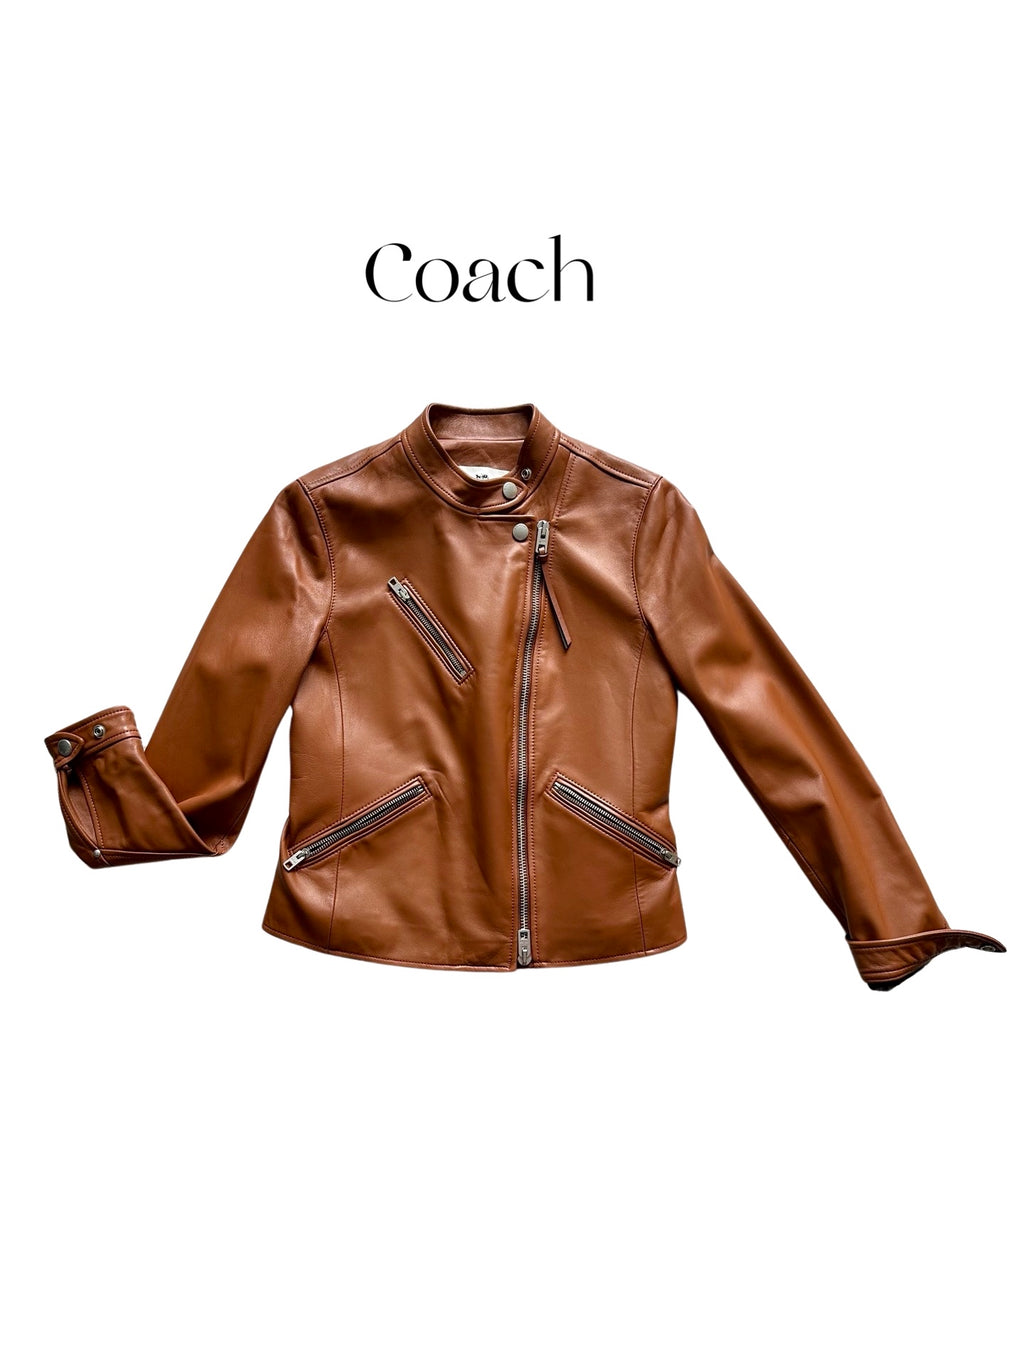 Coach Brown Leather Jacket